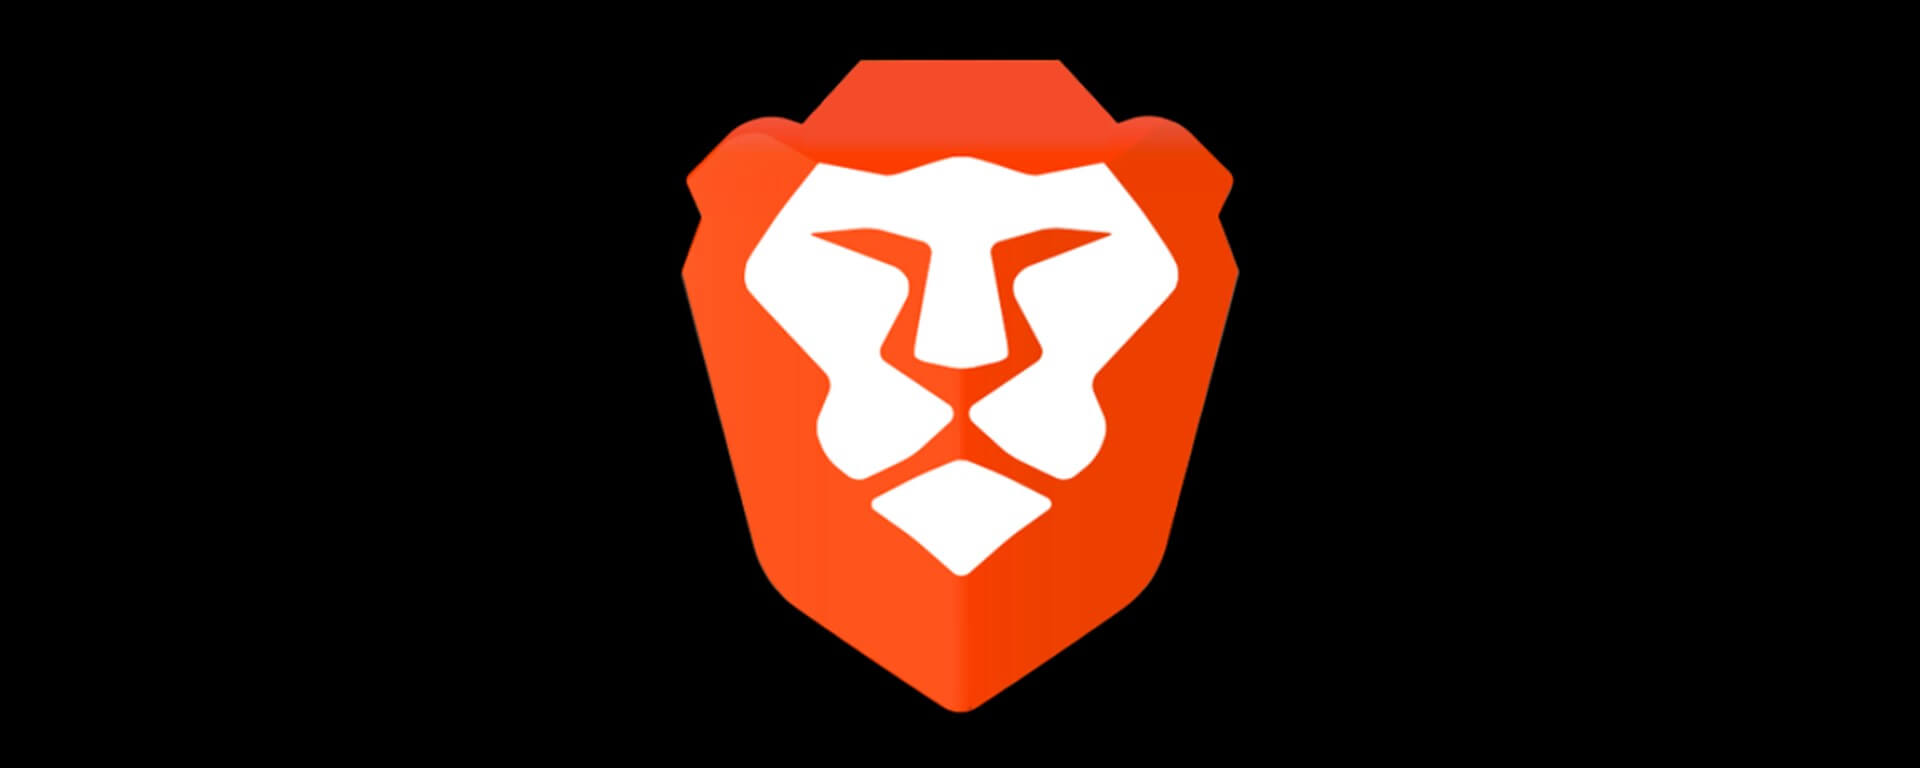 brave 1.57.47 download the new version for iphone